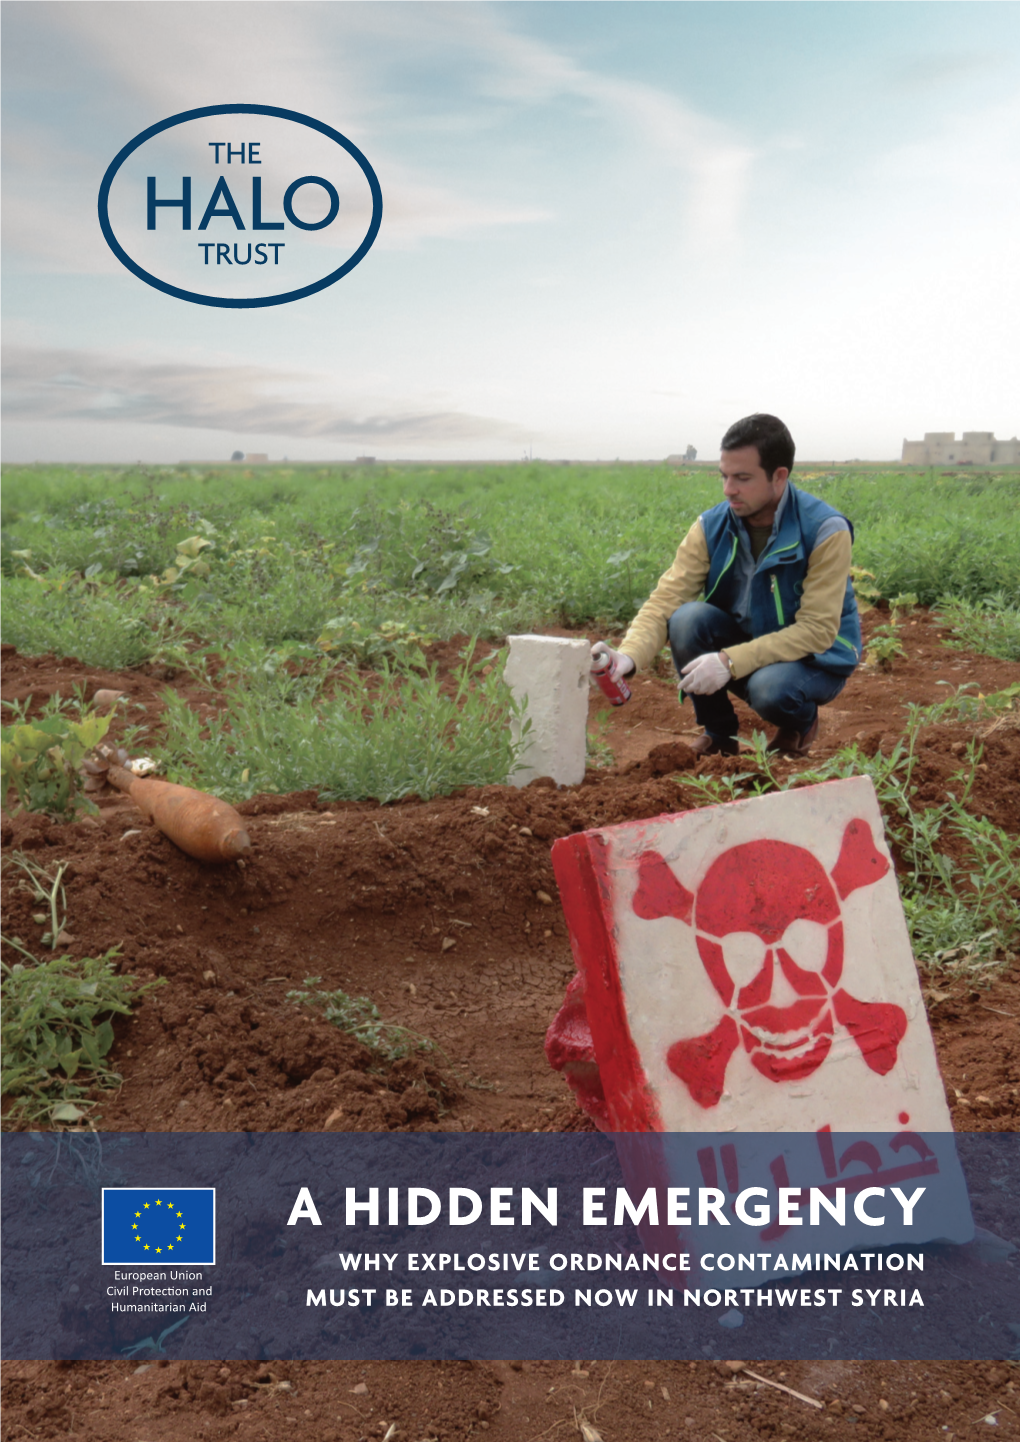 A Hidden Emergency Why Explosive Ordnance Contamination Must Be Addressed Now in Northwest Syria